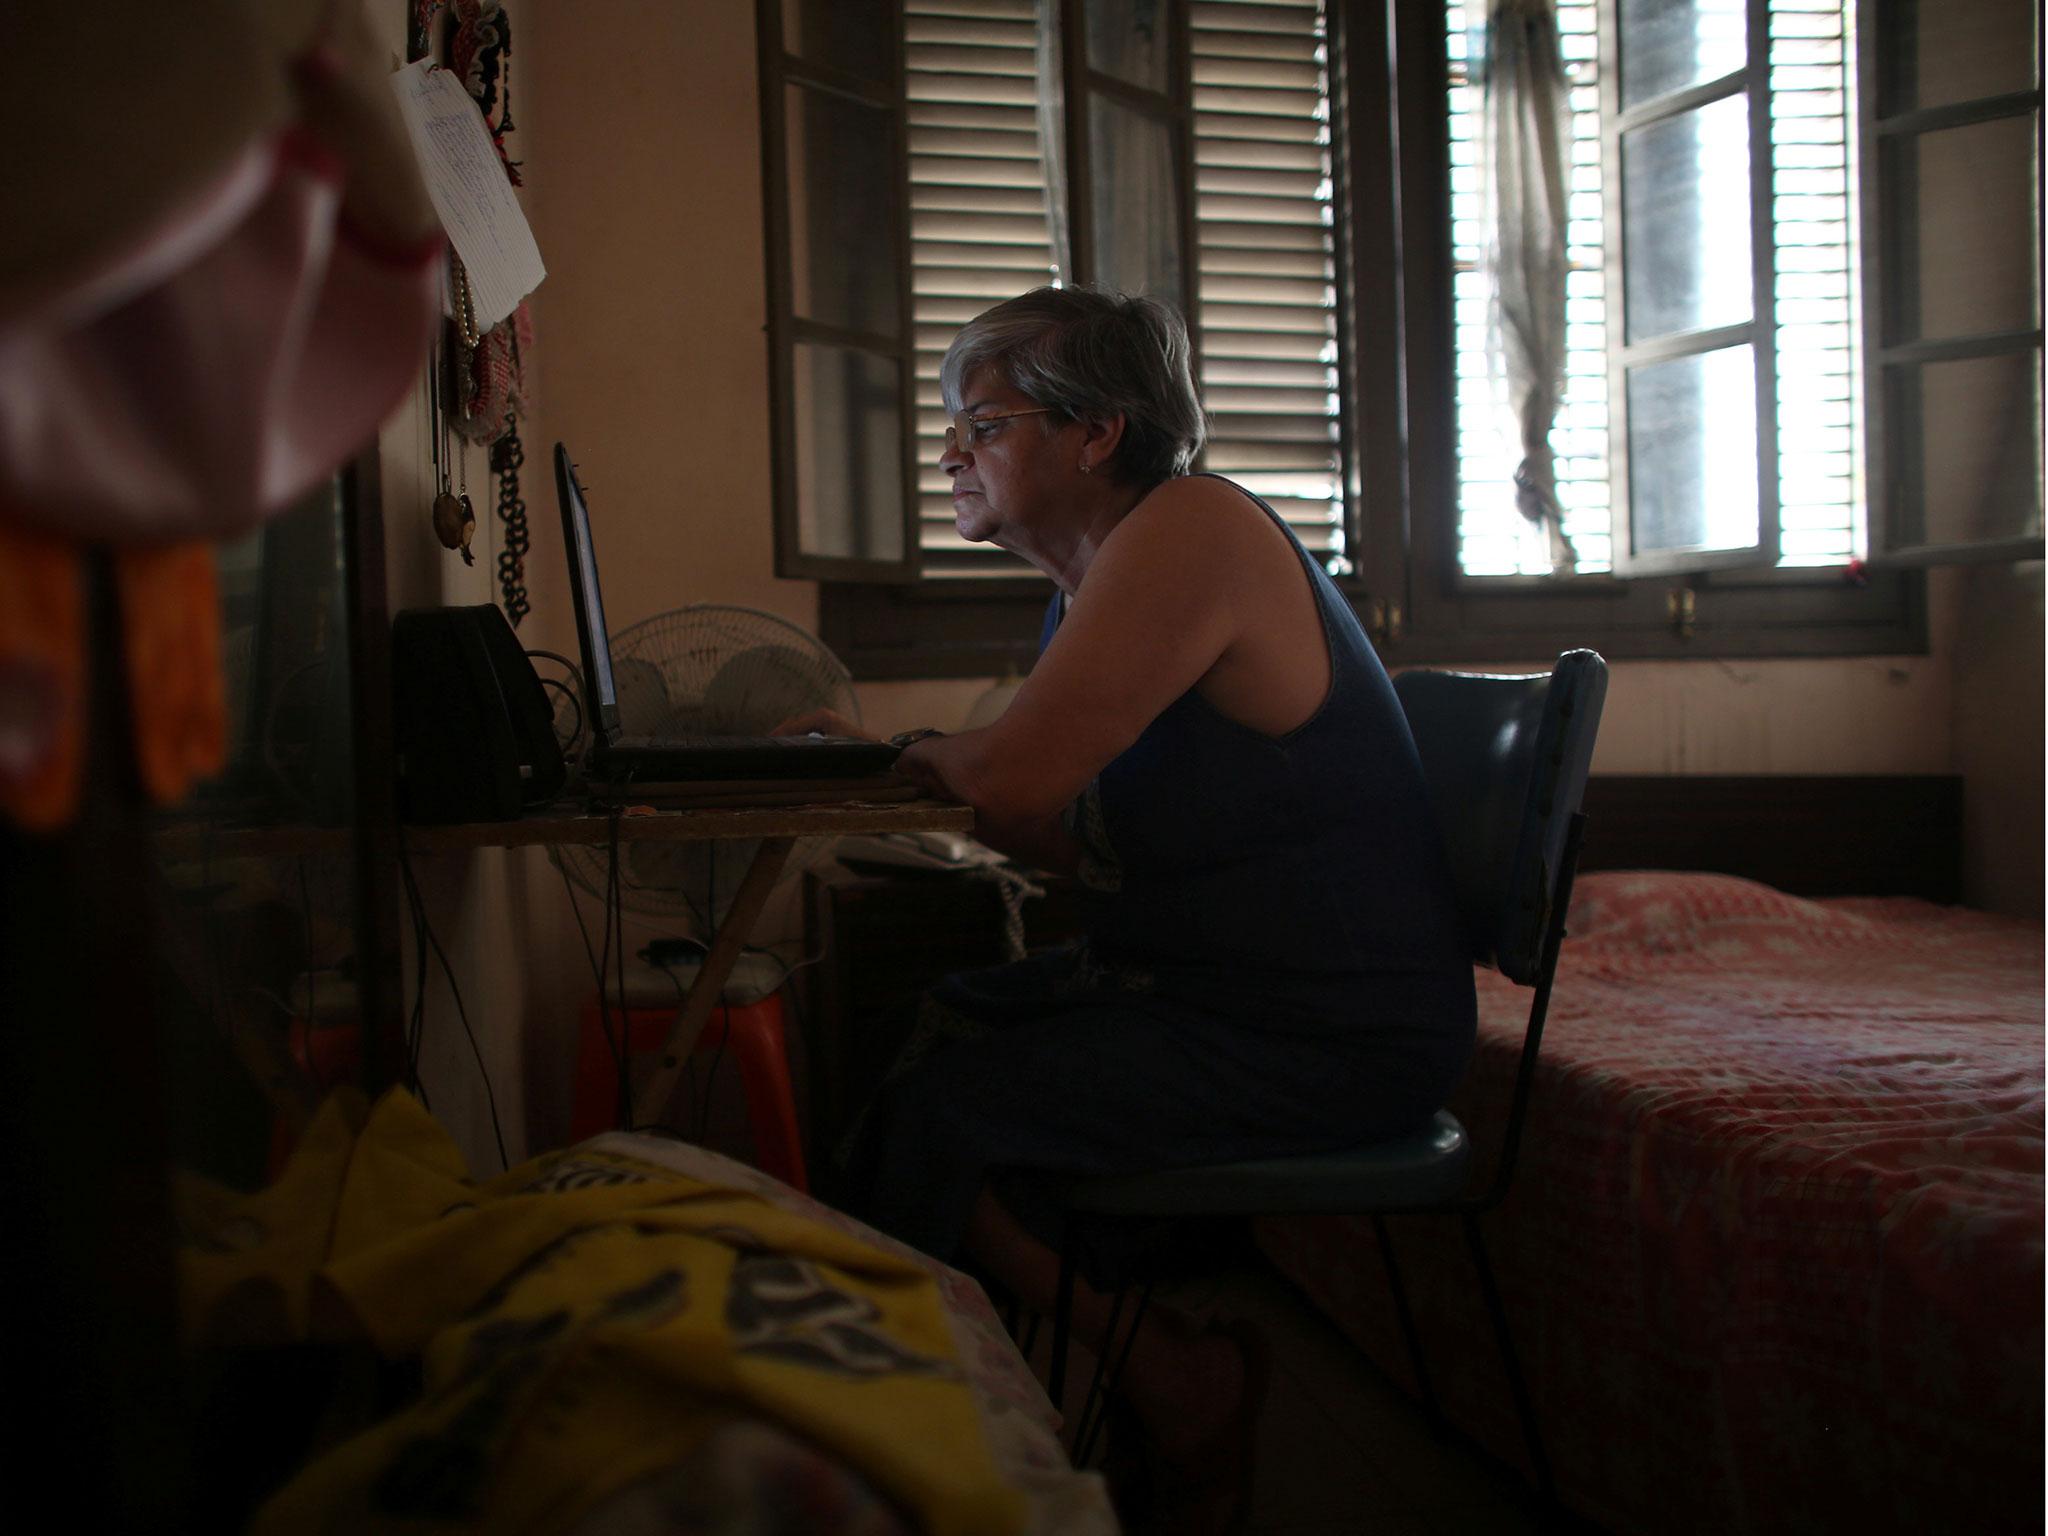 Retired teacher Margarita Marquez, 67, uses the internet after it was recently installed at her home in old Havana, Cuba, 29 December, 2016